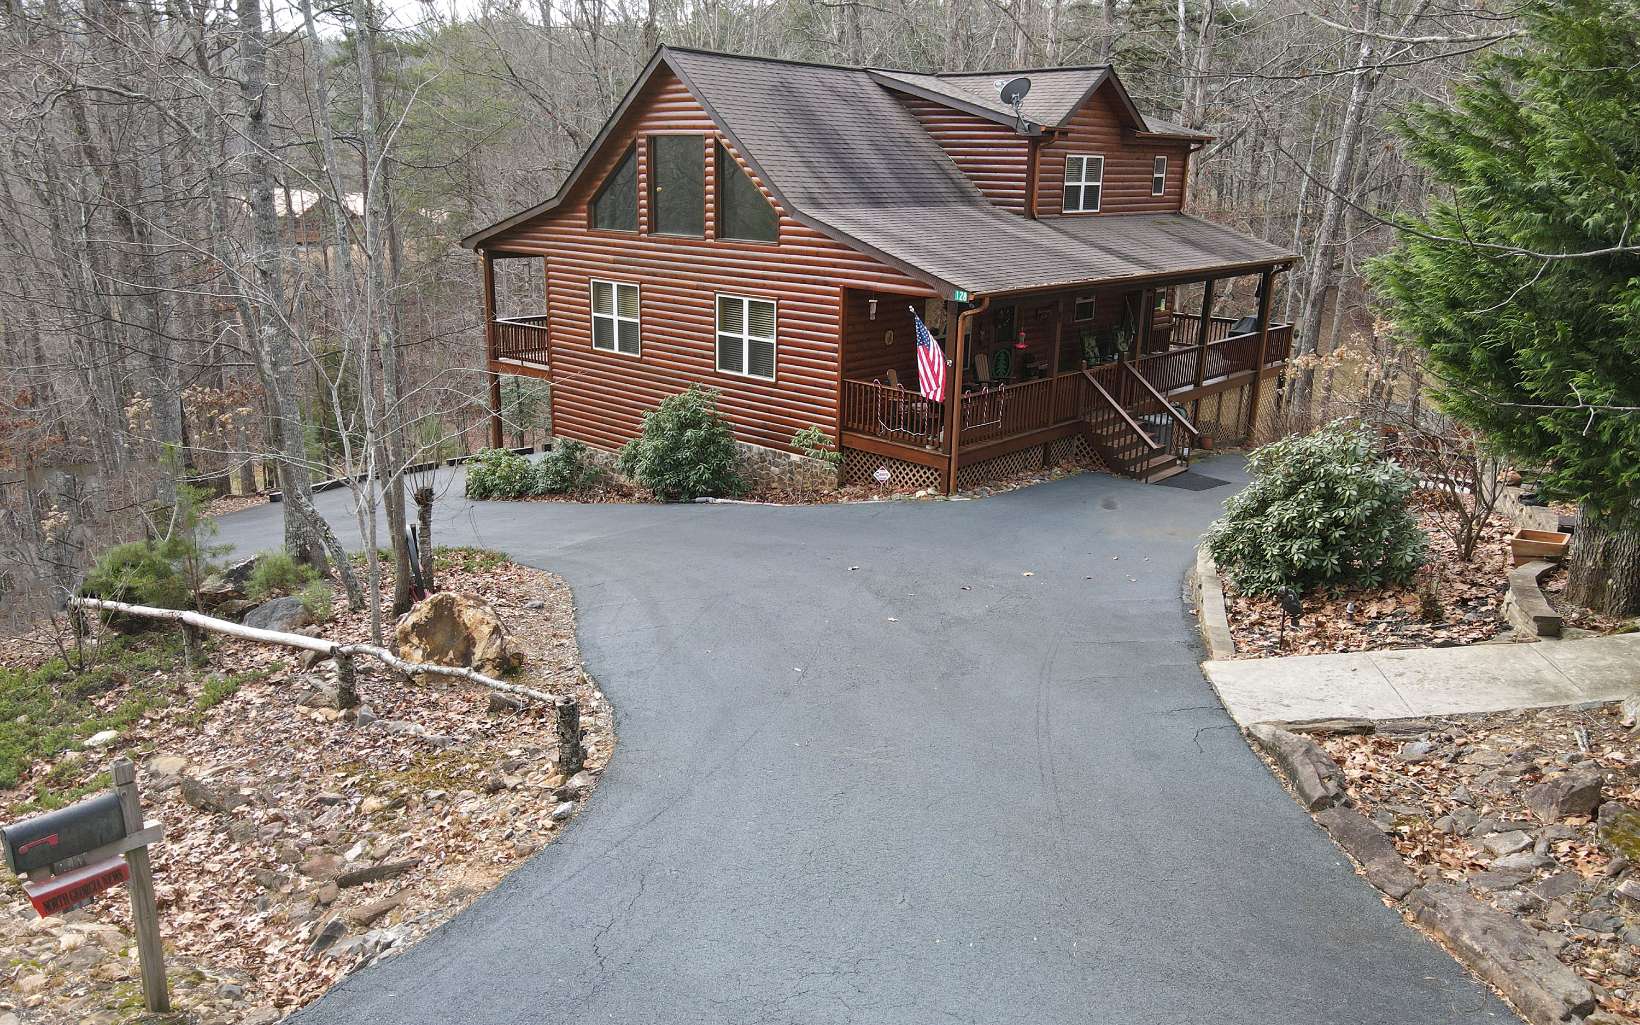 AMAZING ABUNDANCE in this LOG sided home on 4.95 Acres! Great room sizes and beautiful wood floors and ceilings, nice mixture of drywall and wood. Stone Fireplace, Masters on every floor. Full additional kitchen in lower level, lots of storage areas. Detached 2 plus garage with Bonus/Bedroom above with half bath. Wrap around porch, fire pit area, with exceptional landscaping. Bring all your lake toys, close to Lake Nottely and marina. Perfect areas for guests or live in family!